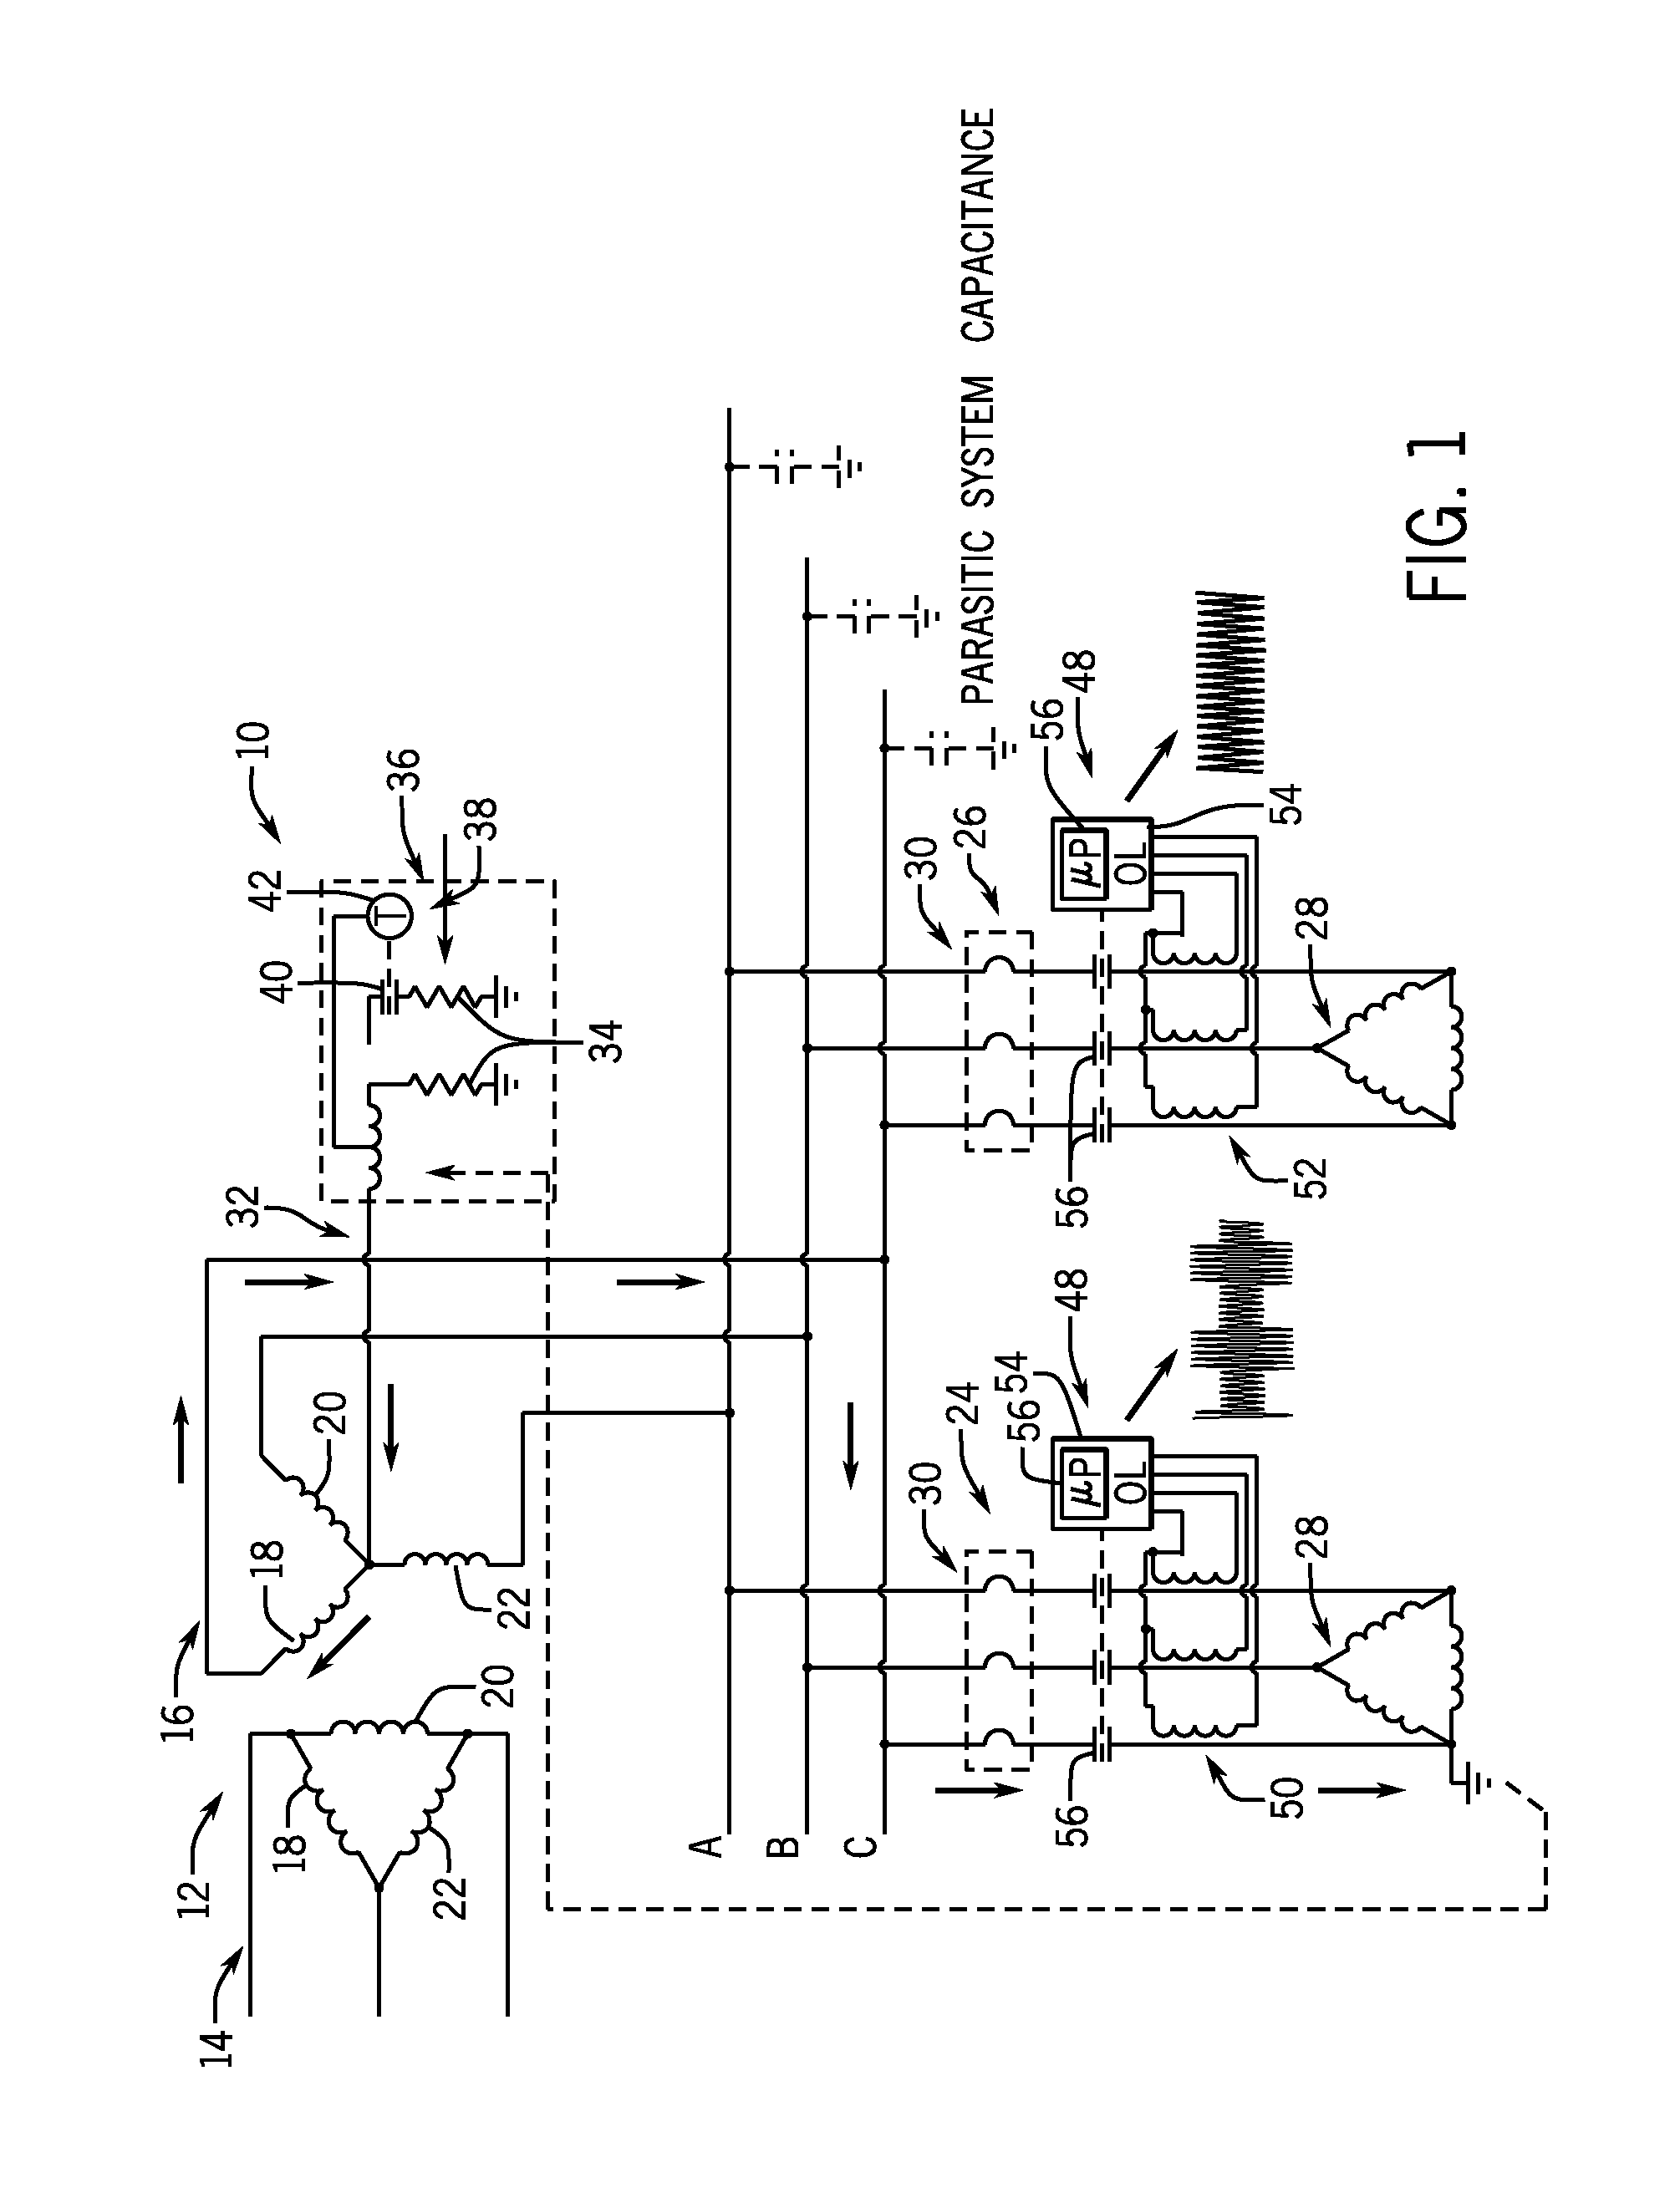 System and method for pulsed ground fault detection and localization